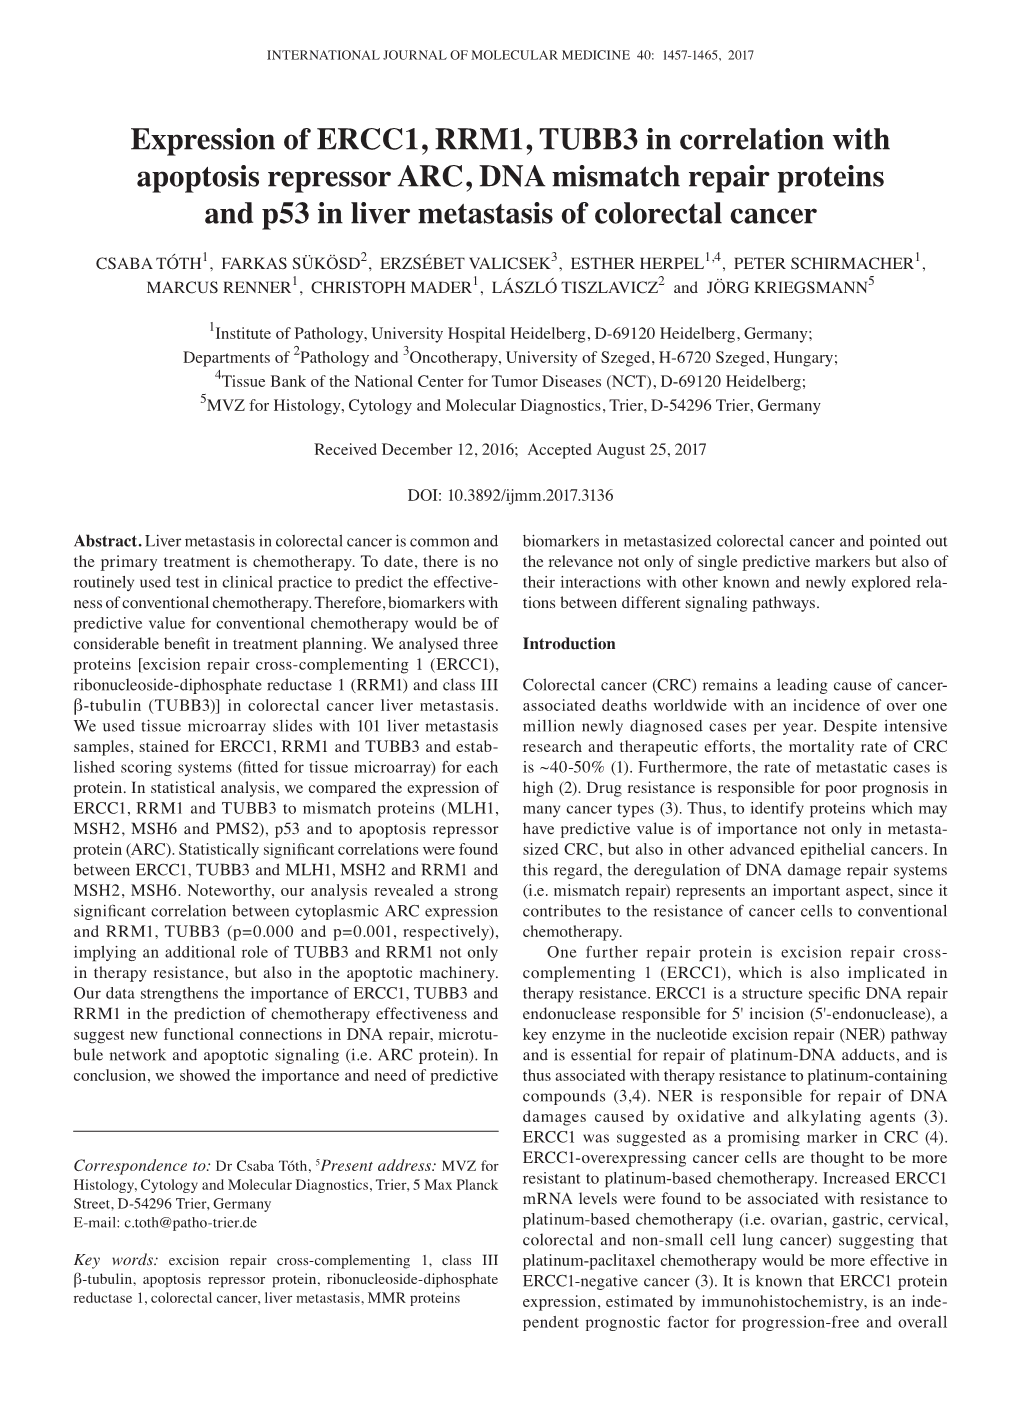 Expression of ERCC1, RRM1, TUBB3 in Correlation with Apoptosis Repressor ARC, DNA Mismatch Repair Proteins and P53 in Liver Metastasis of Colorectal Cancer